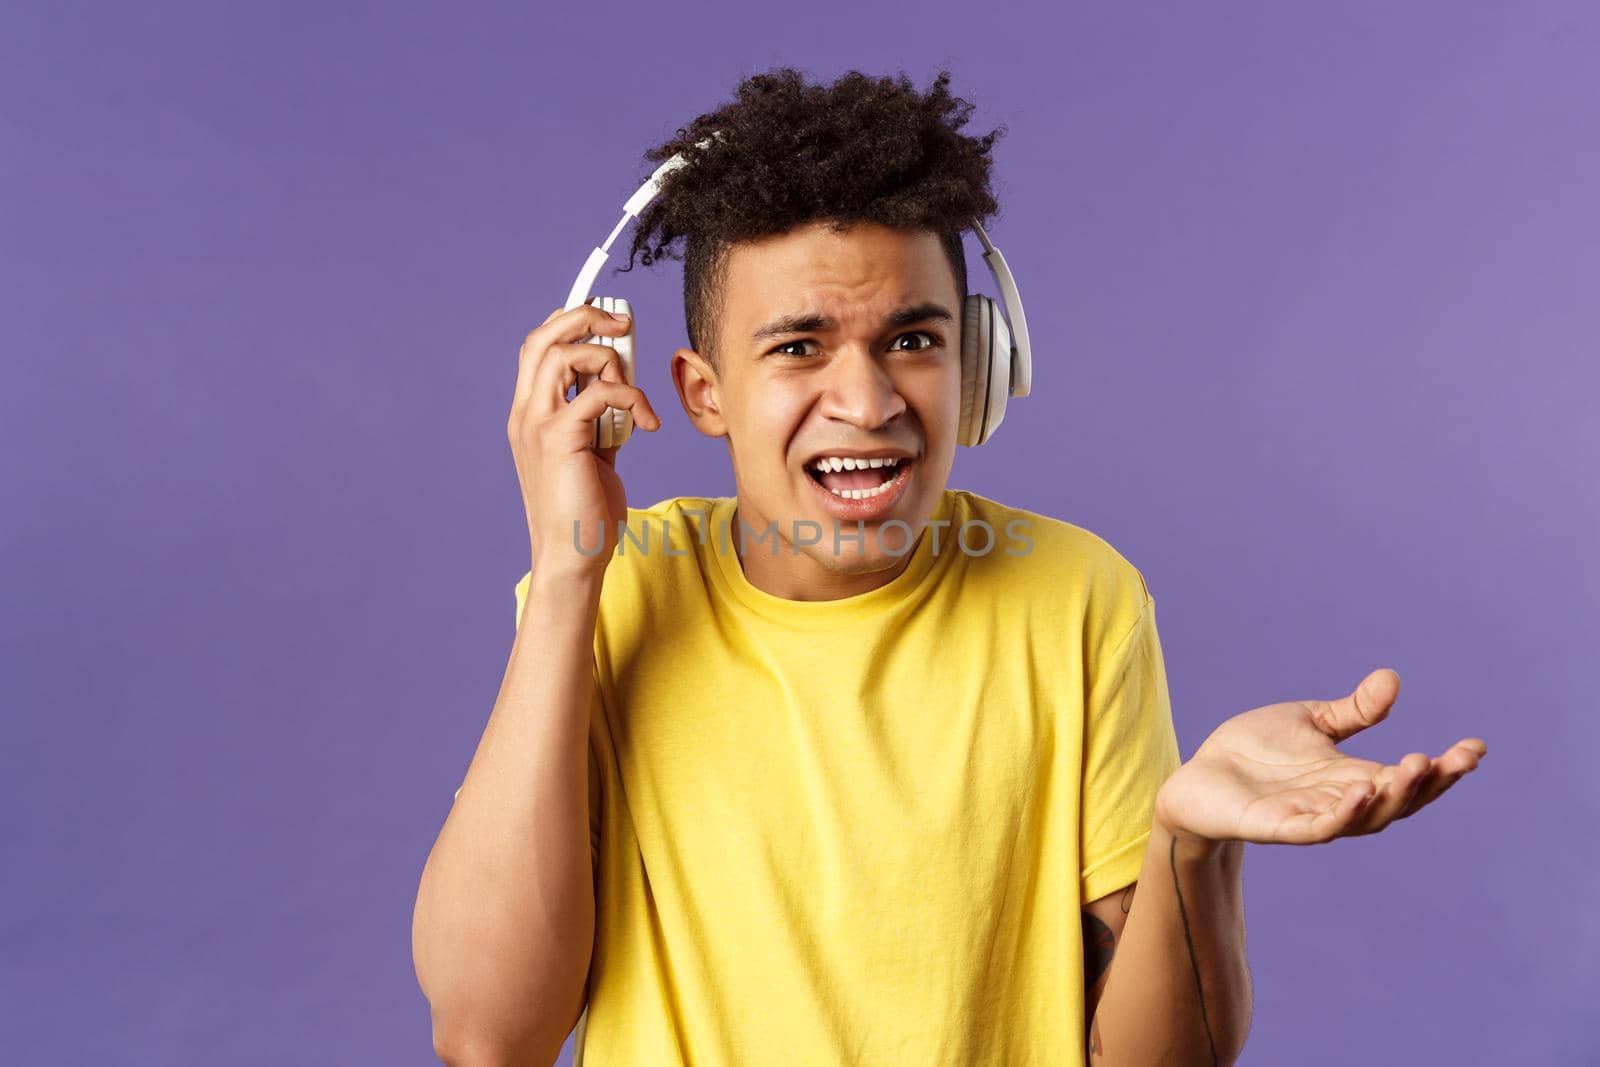 What do you want, I am in headphones. Portrait of confused annoyed young man shrugging, take-off earphone to hear what person asked while he was listening music, purple background.